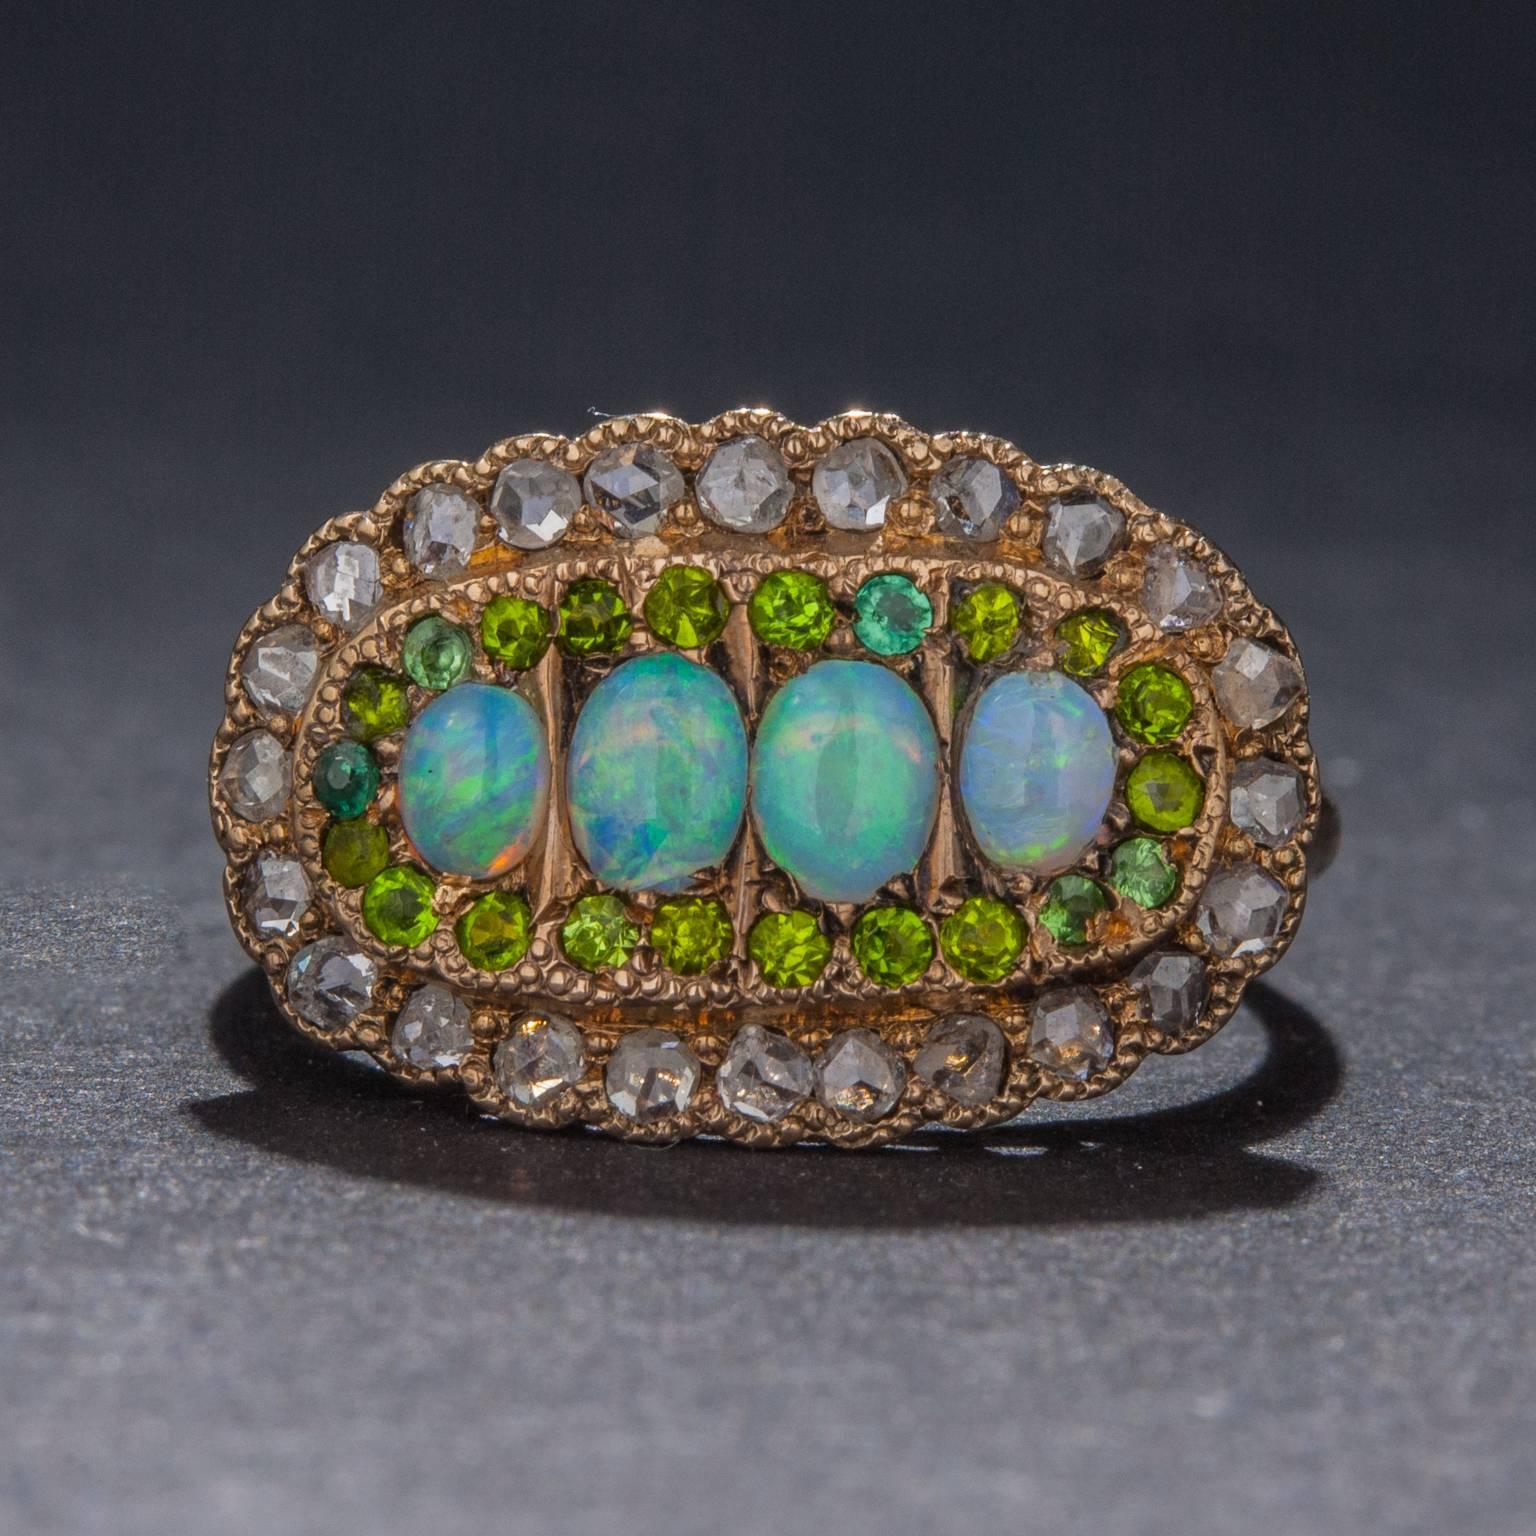 This exceedingly beautiful vintage ring was handcrafted in the Victorian era. The ring features 4 opals weighing a combined total of .50 carats, 24 diamonds for .50 total carats, and 22 demantoid garnet for a total of .25 carats. This rare ring is